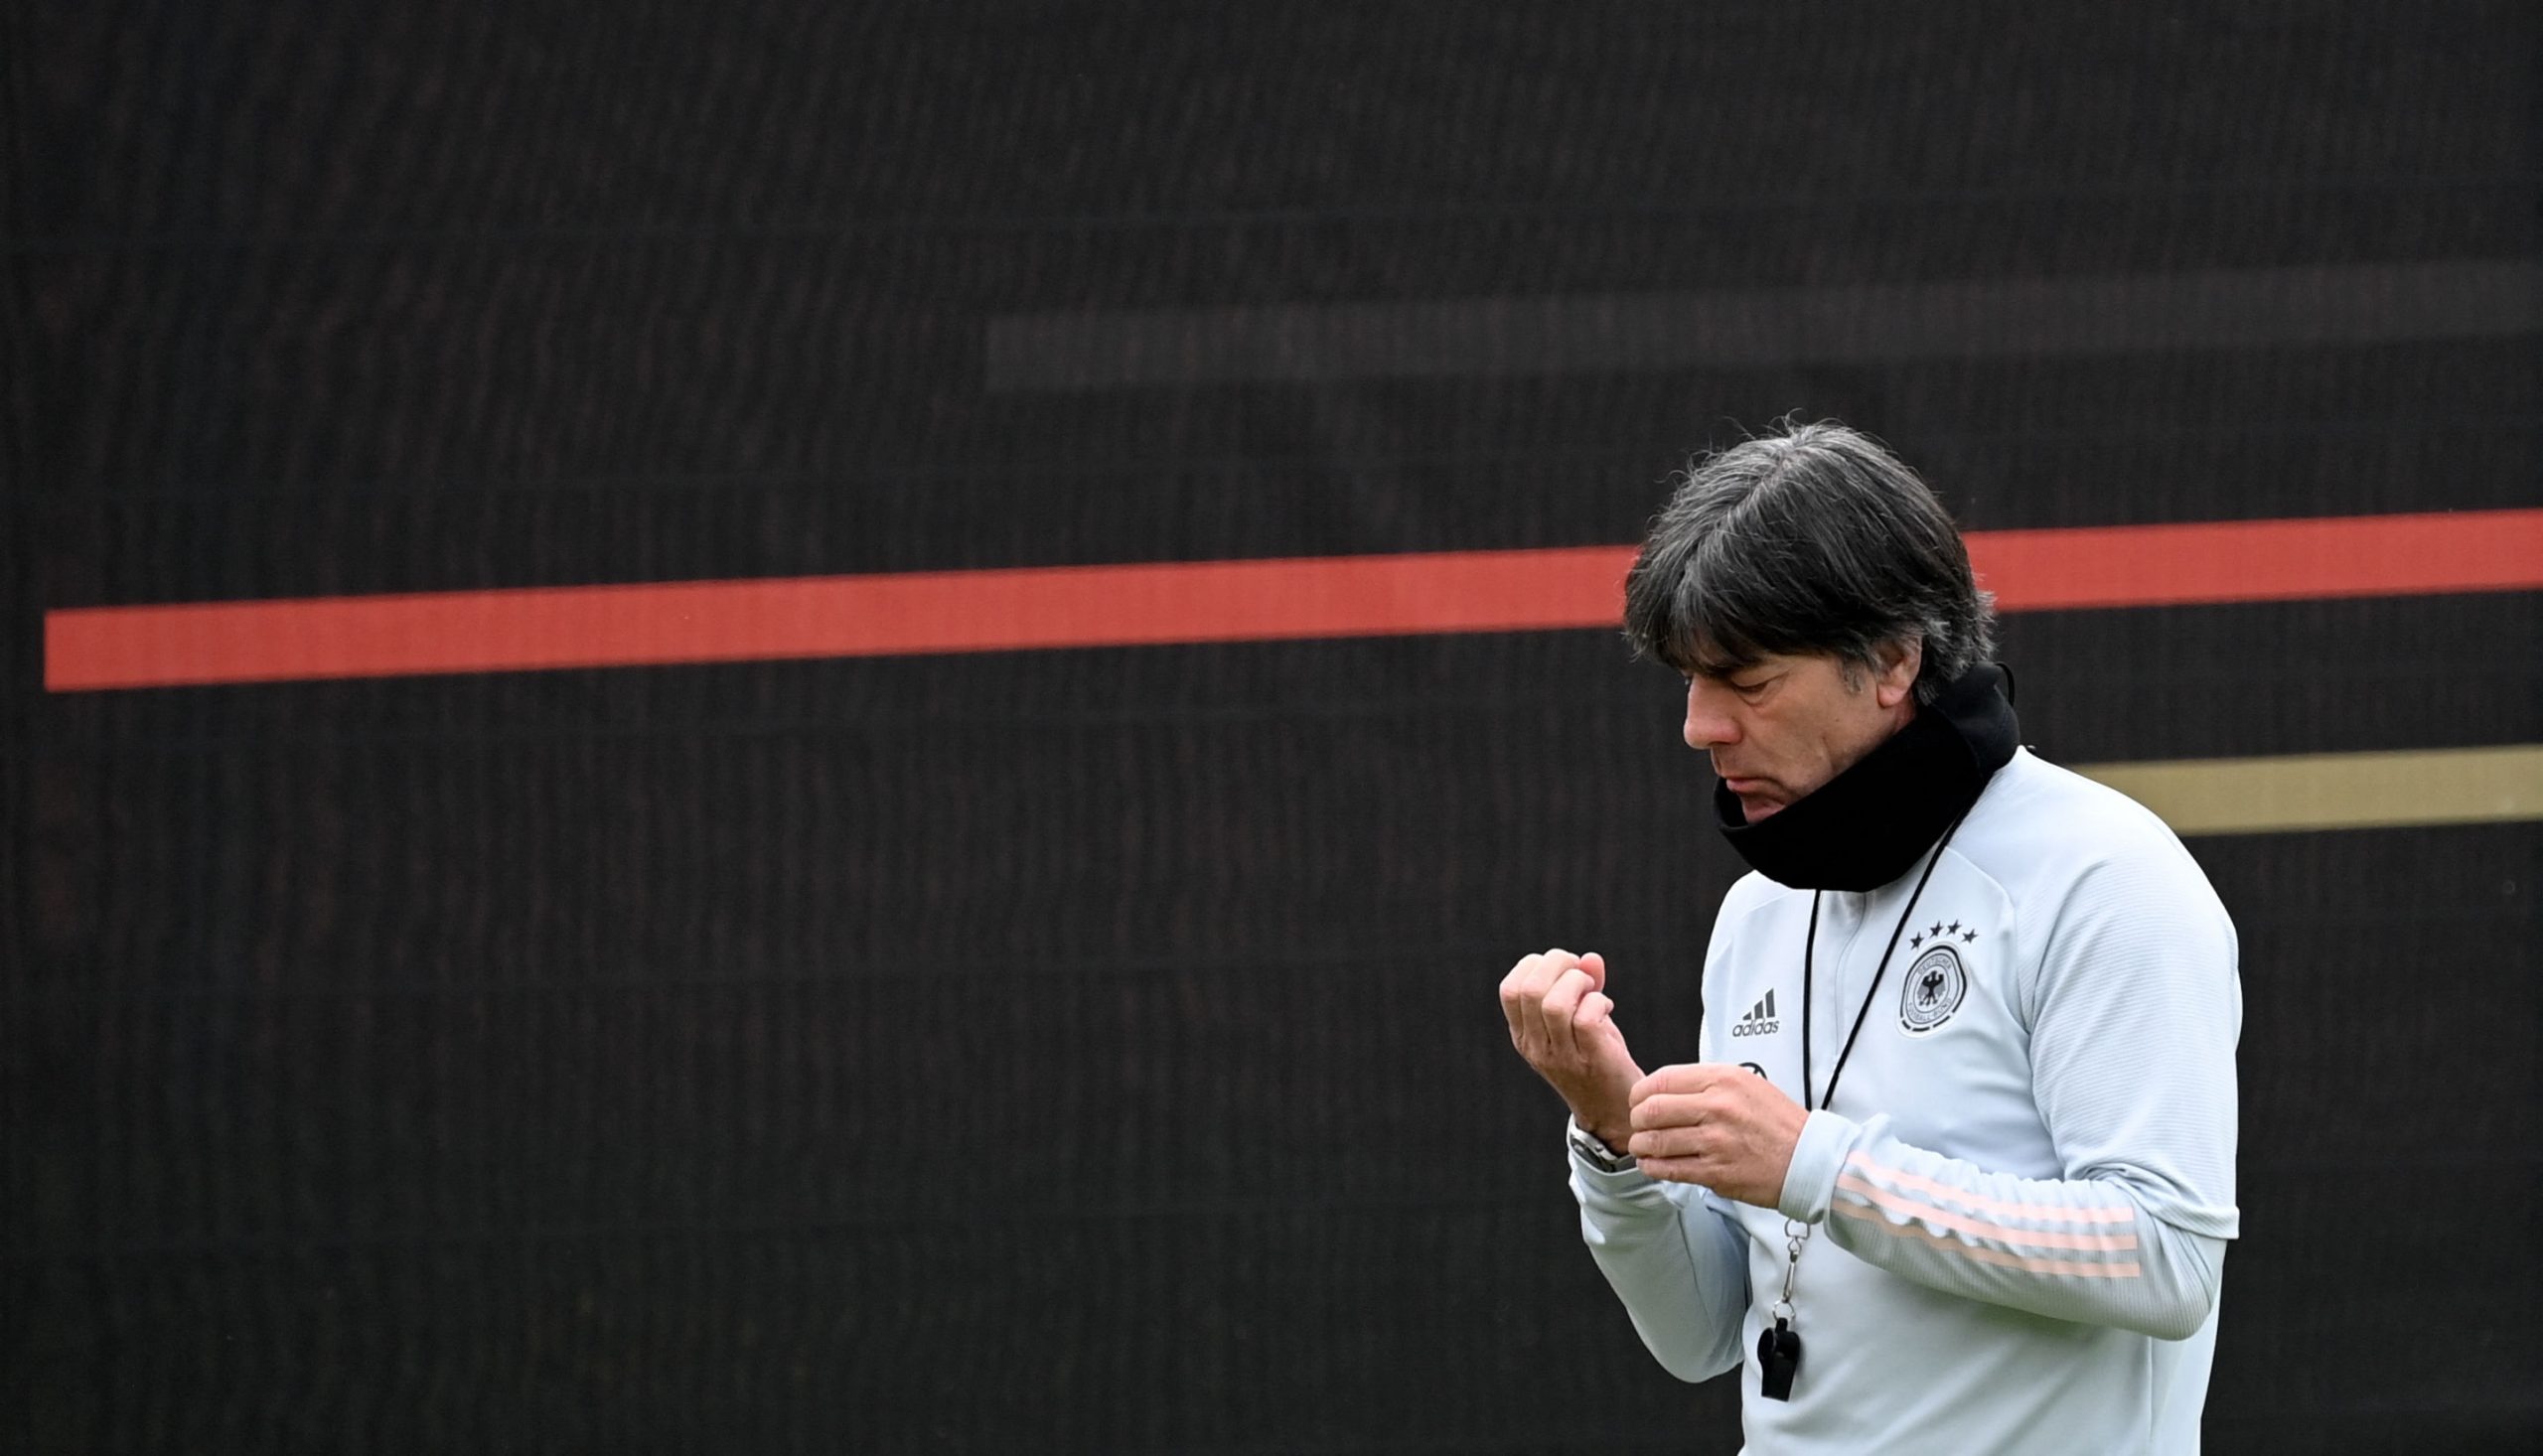 EURO 2020: Can Joachim Low’s last dance with Germany end in glory?